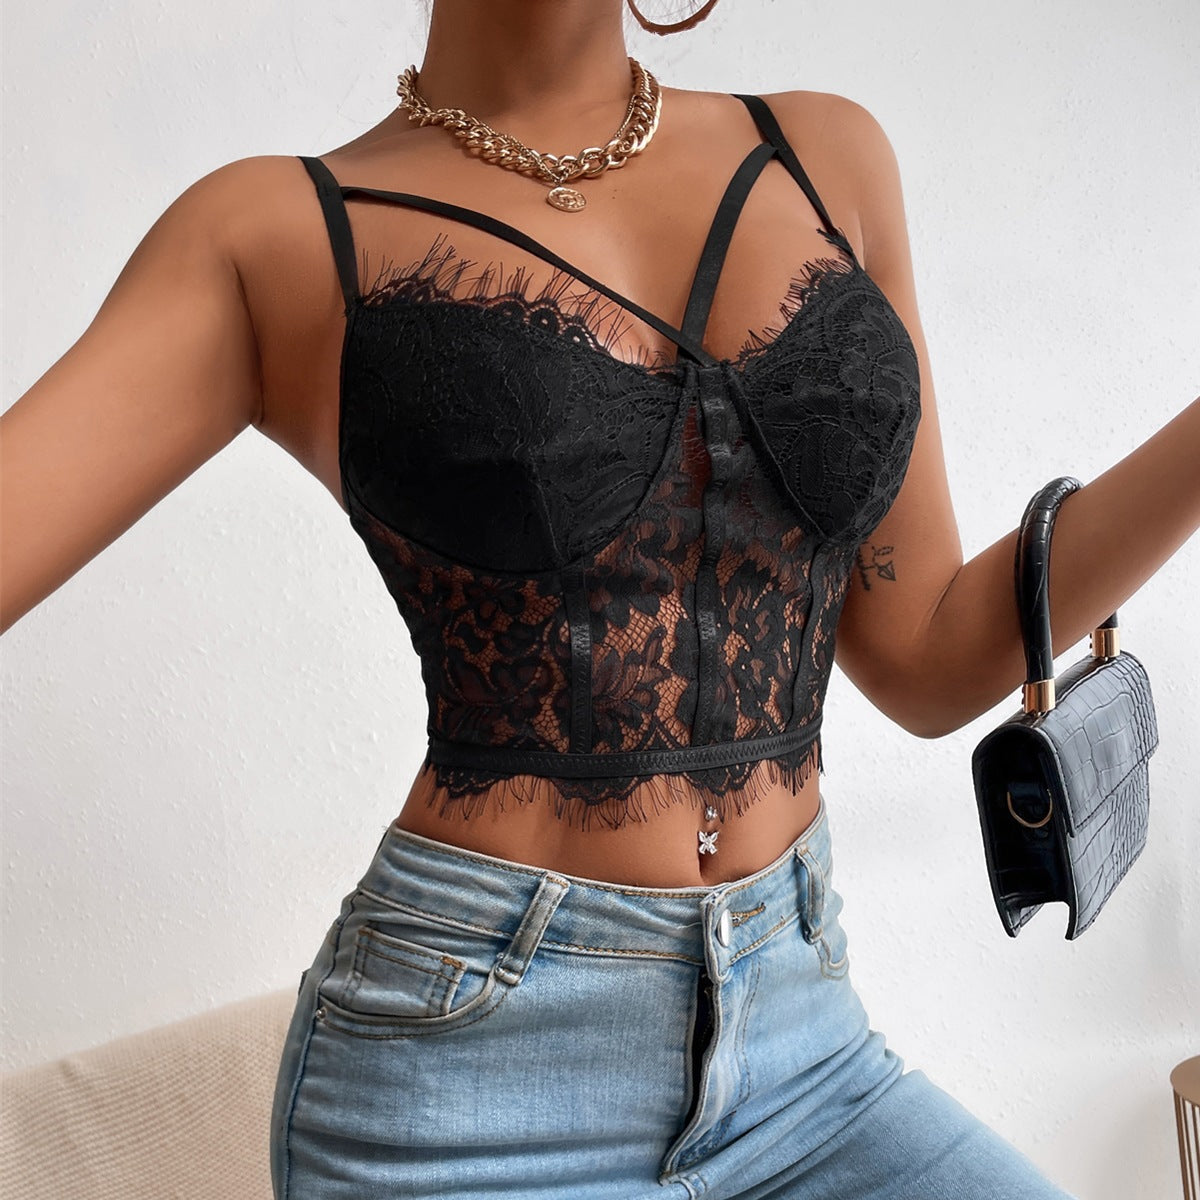 European and American women's clothing fashion new products sexy lace self-cultivation perspective hot girl eyelashes suspender corset